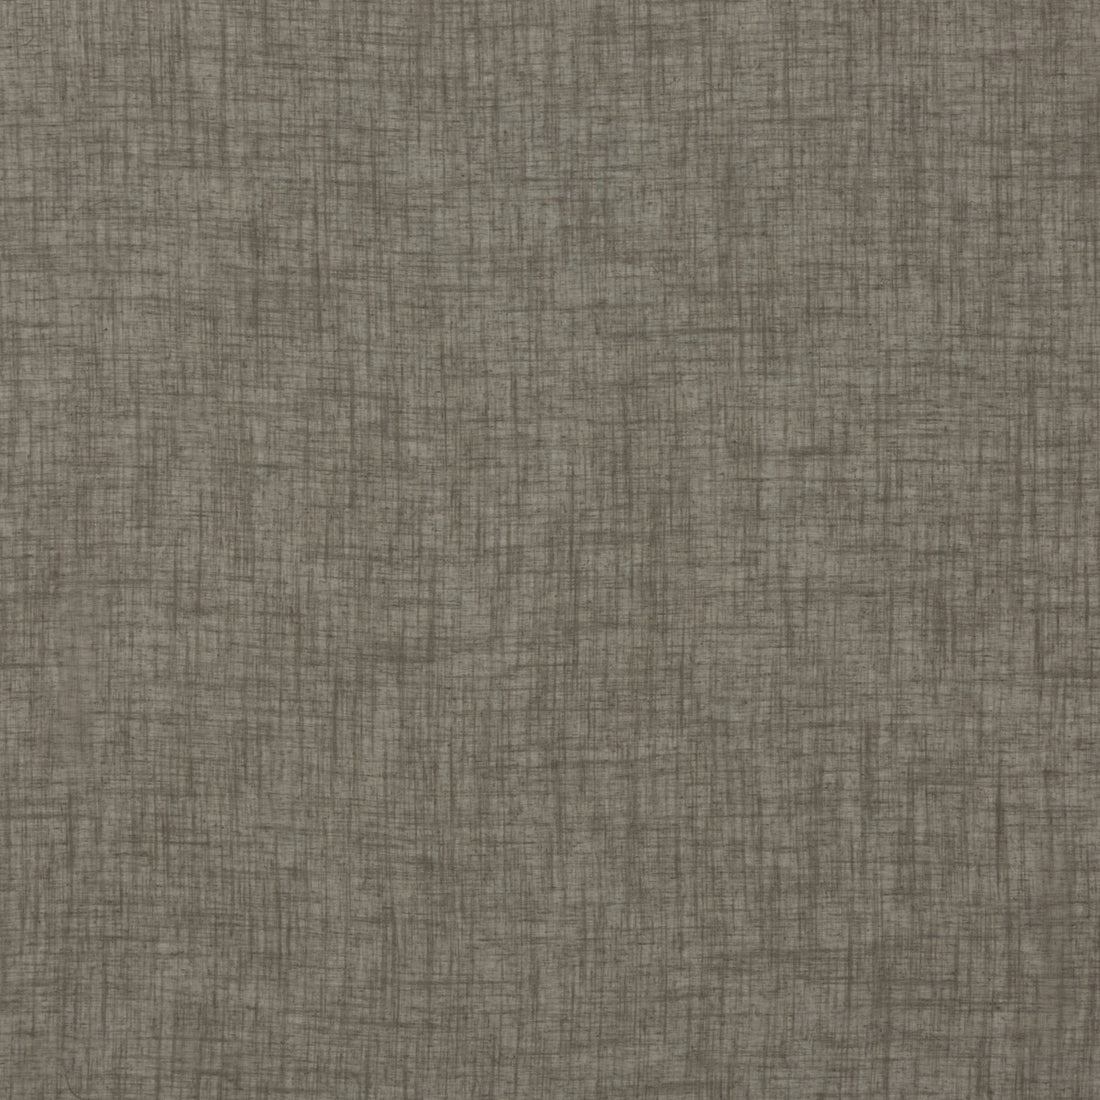 Kelso fabric in mink color - pattern PV1005.285.0 - by Baker Lifestyle in the Notebooks collection